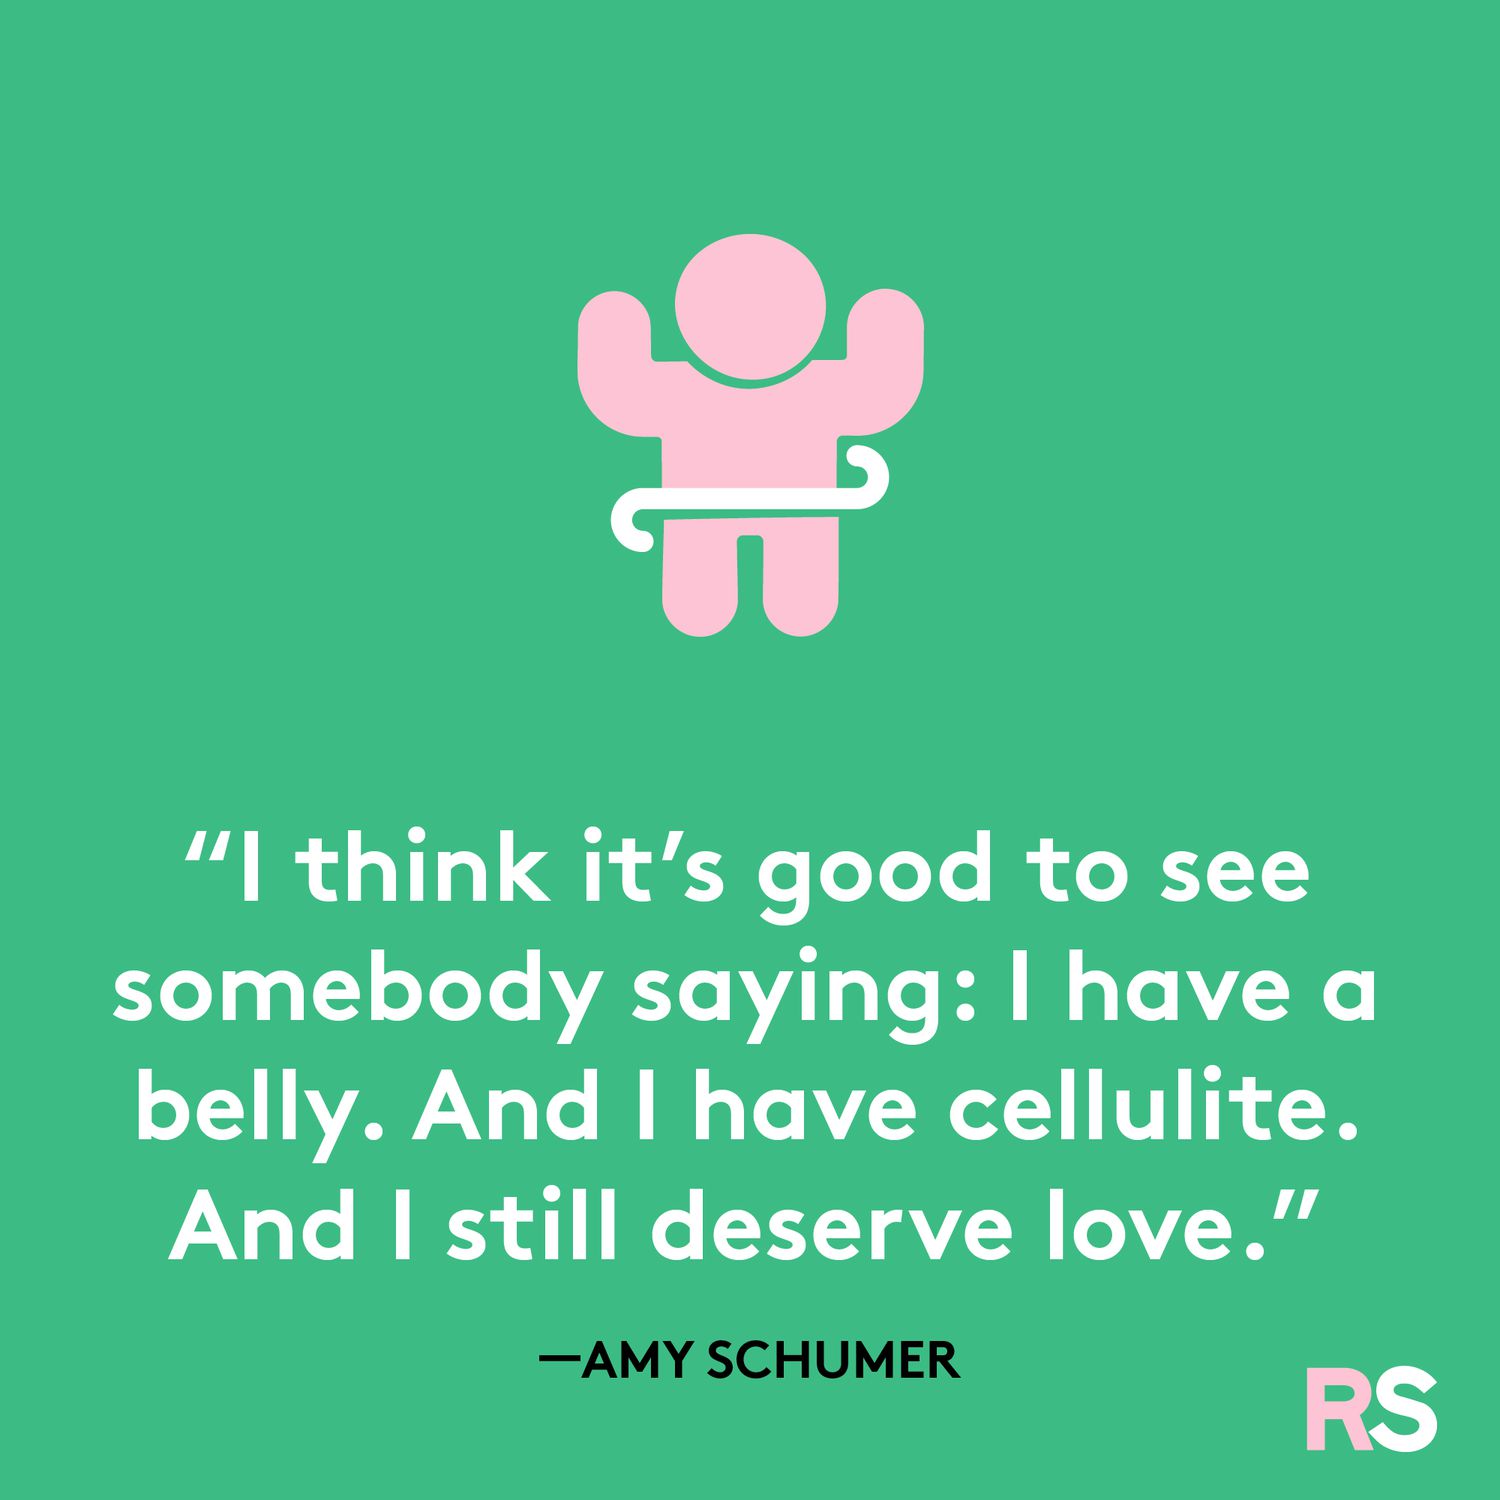 "I think it's good to see somebody saying: I have a belly. And I have cellulite. And I still deserve love.